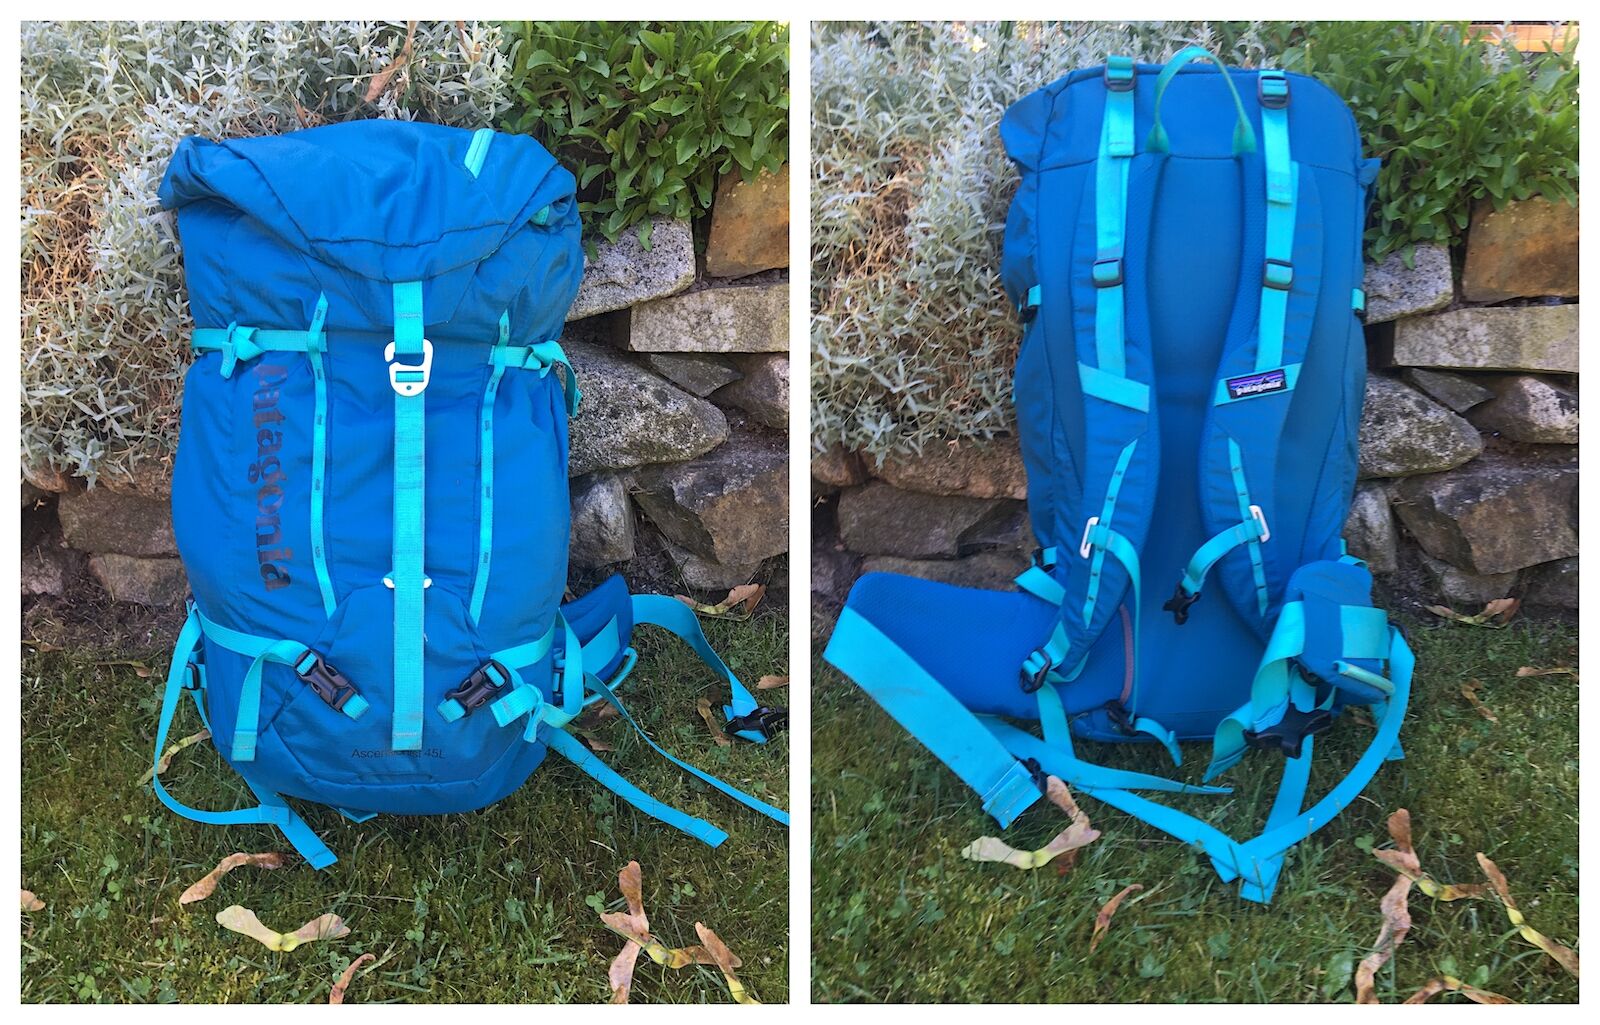 Patagonia backpacks: The Ascensionist 45L